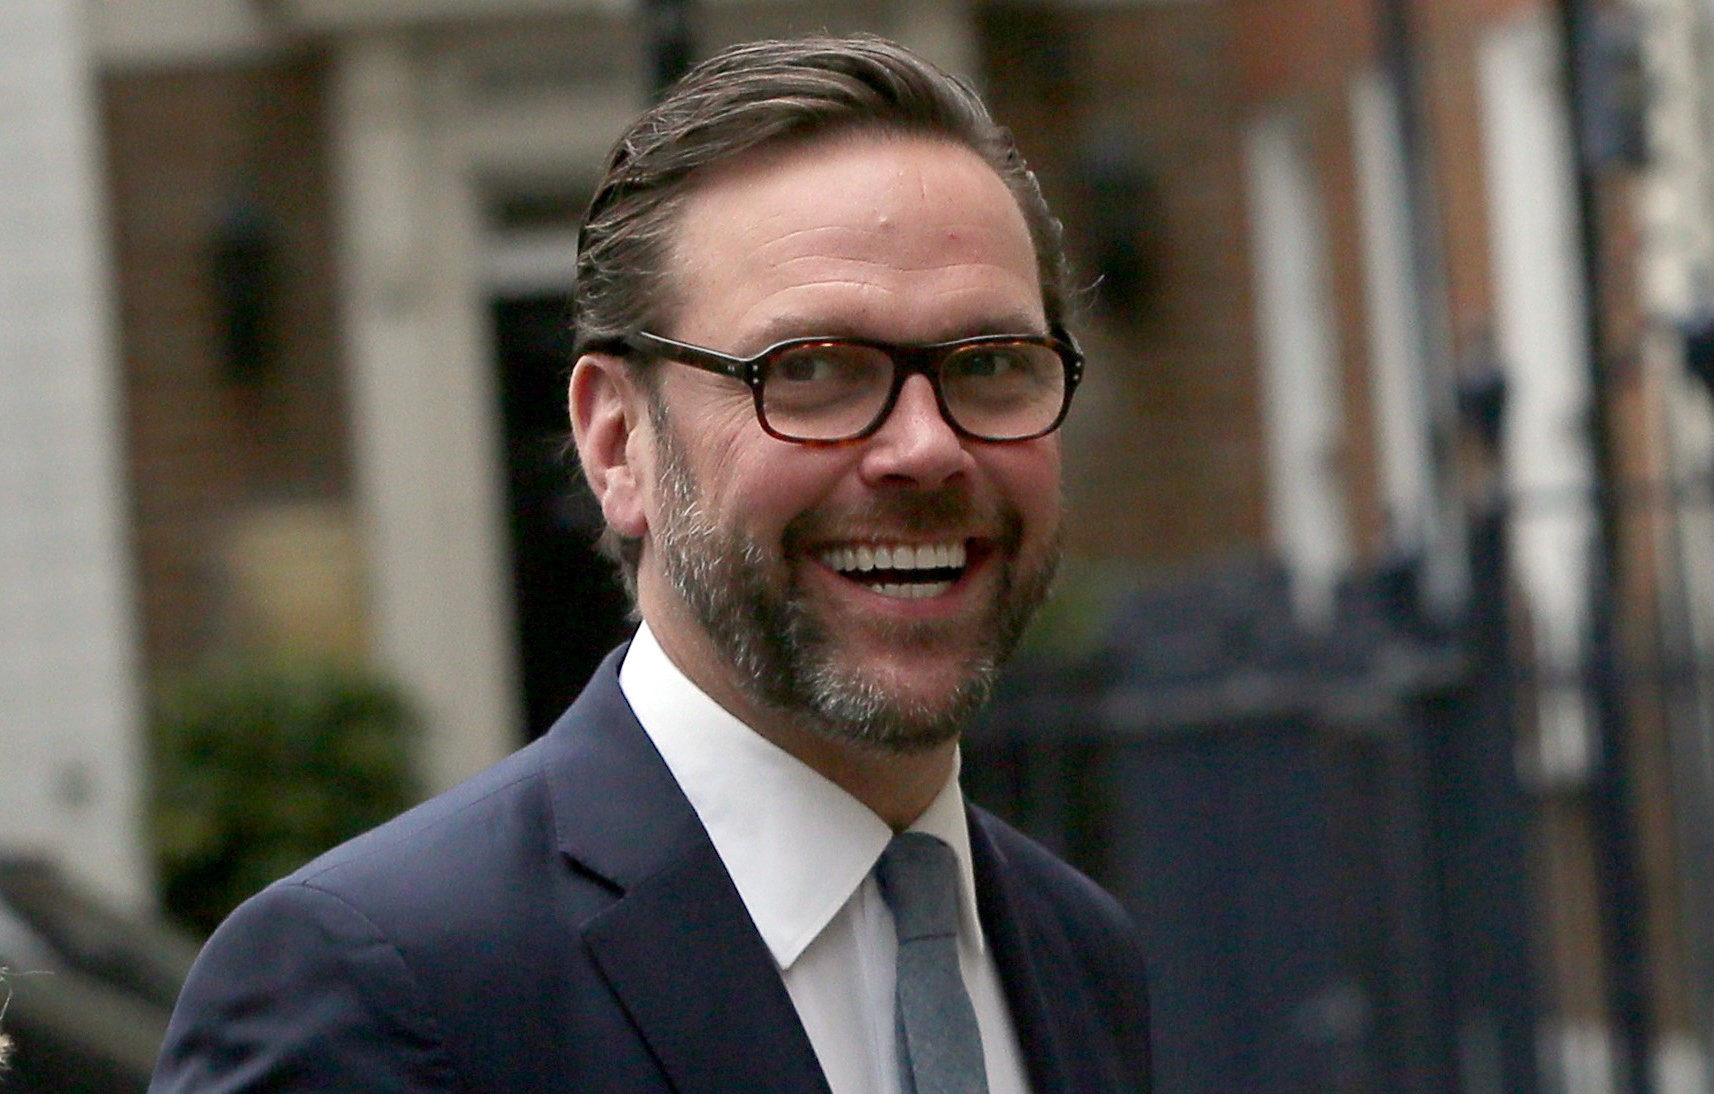 James Murdoch, the son of media mogul Rupert Murdoch, is reportedly in the running to take over from Disney CEO Bob Iger if a merger with Fox takes place. Photo: Reuters